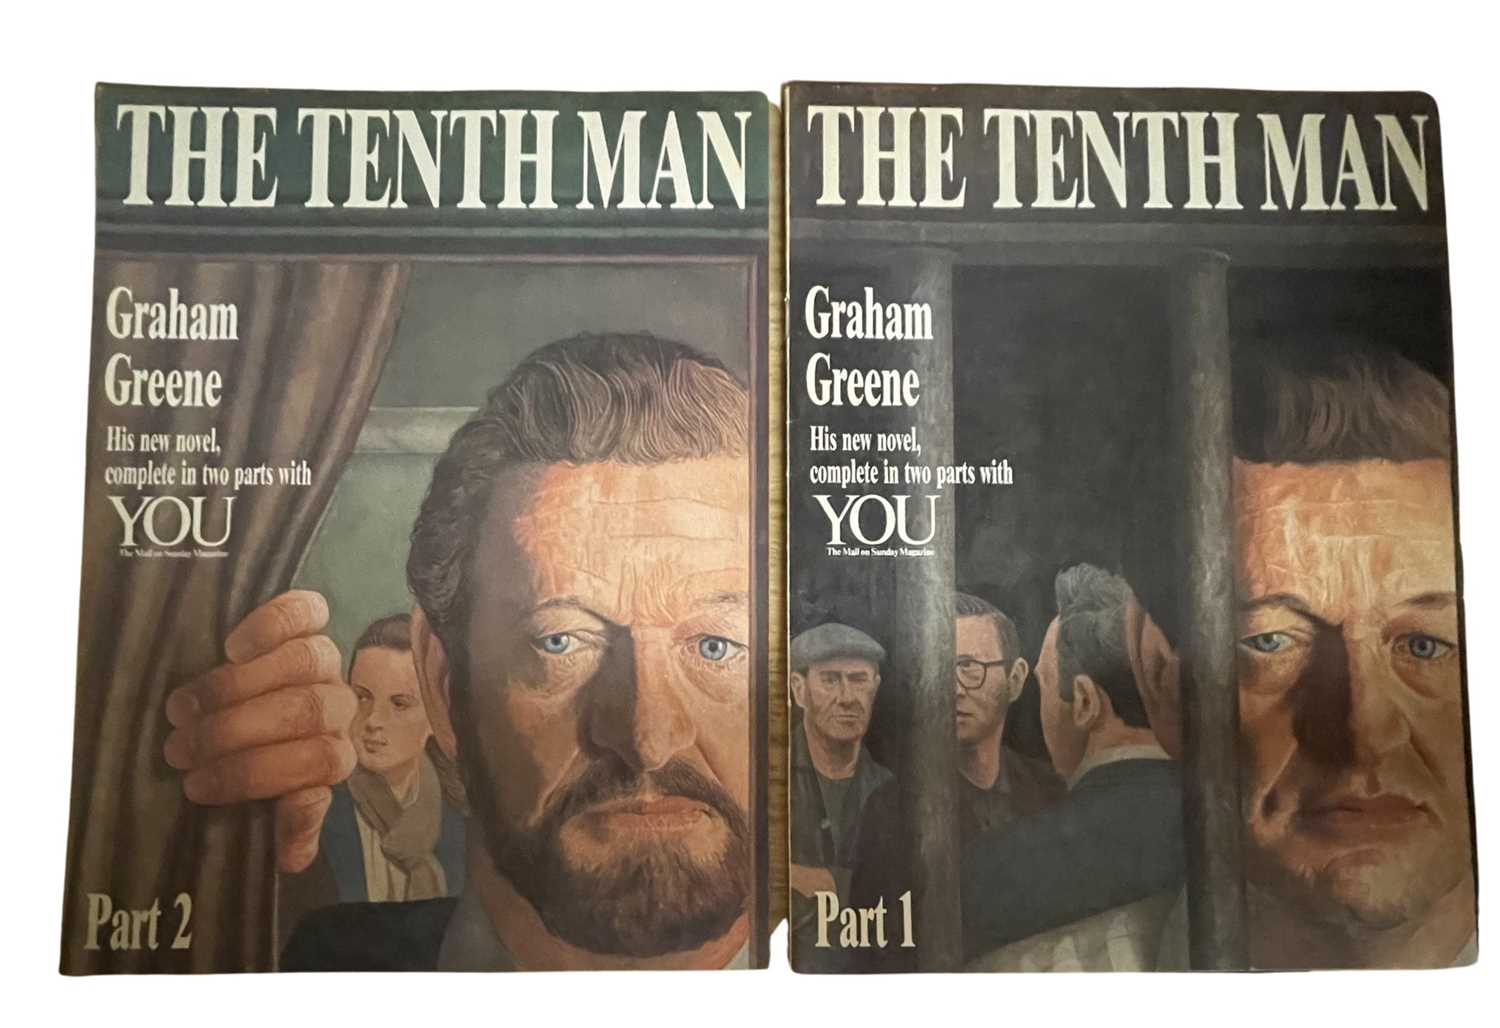 GRAHAM GREENE: THE TENTH MAN, Prebook publication in 2 parts in the Mail on Sunday Magazine.